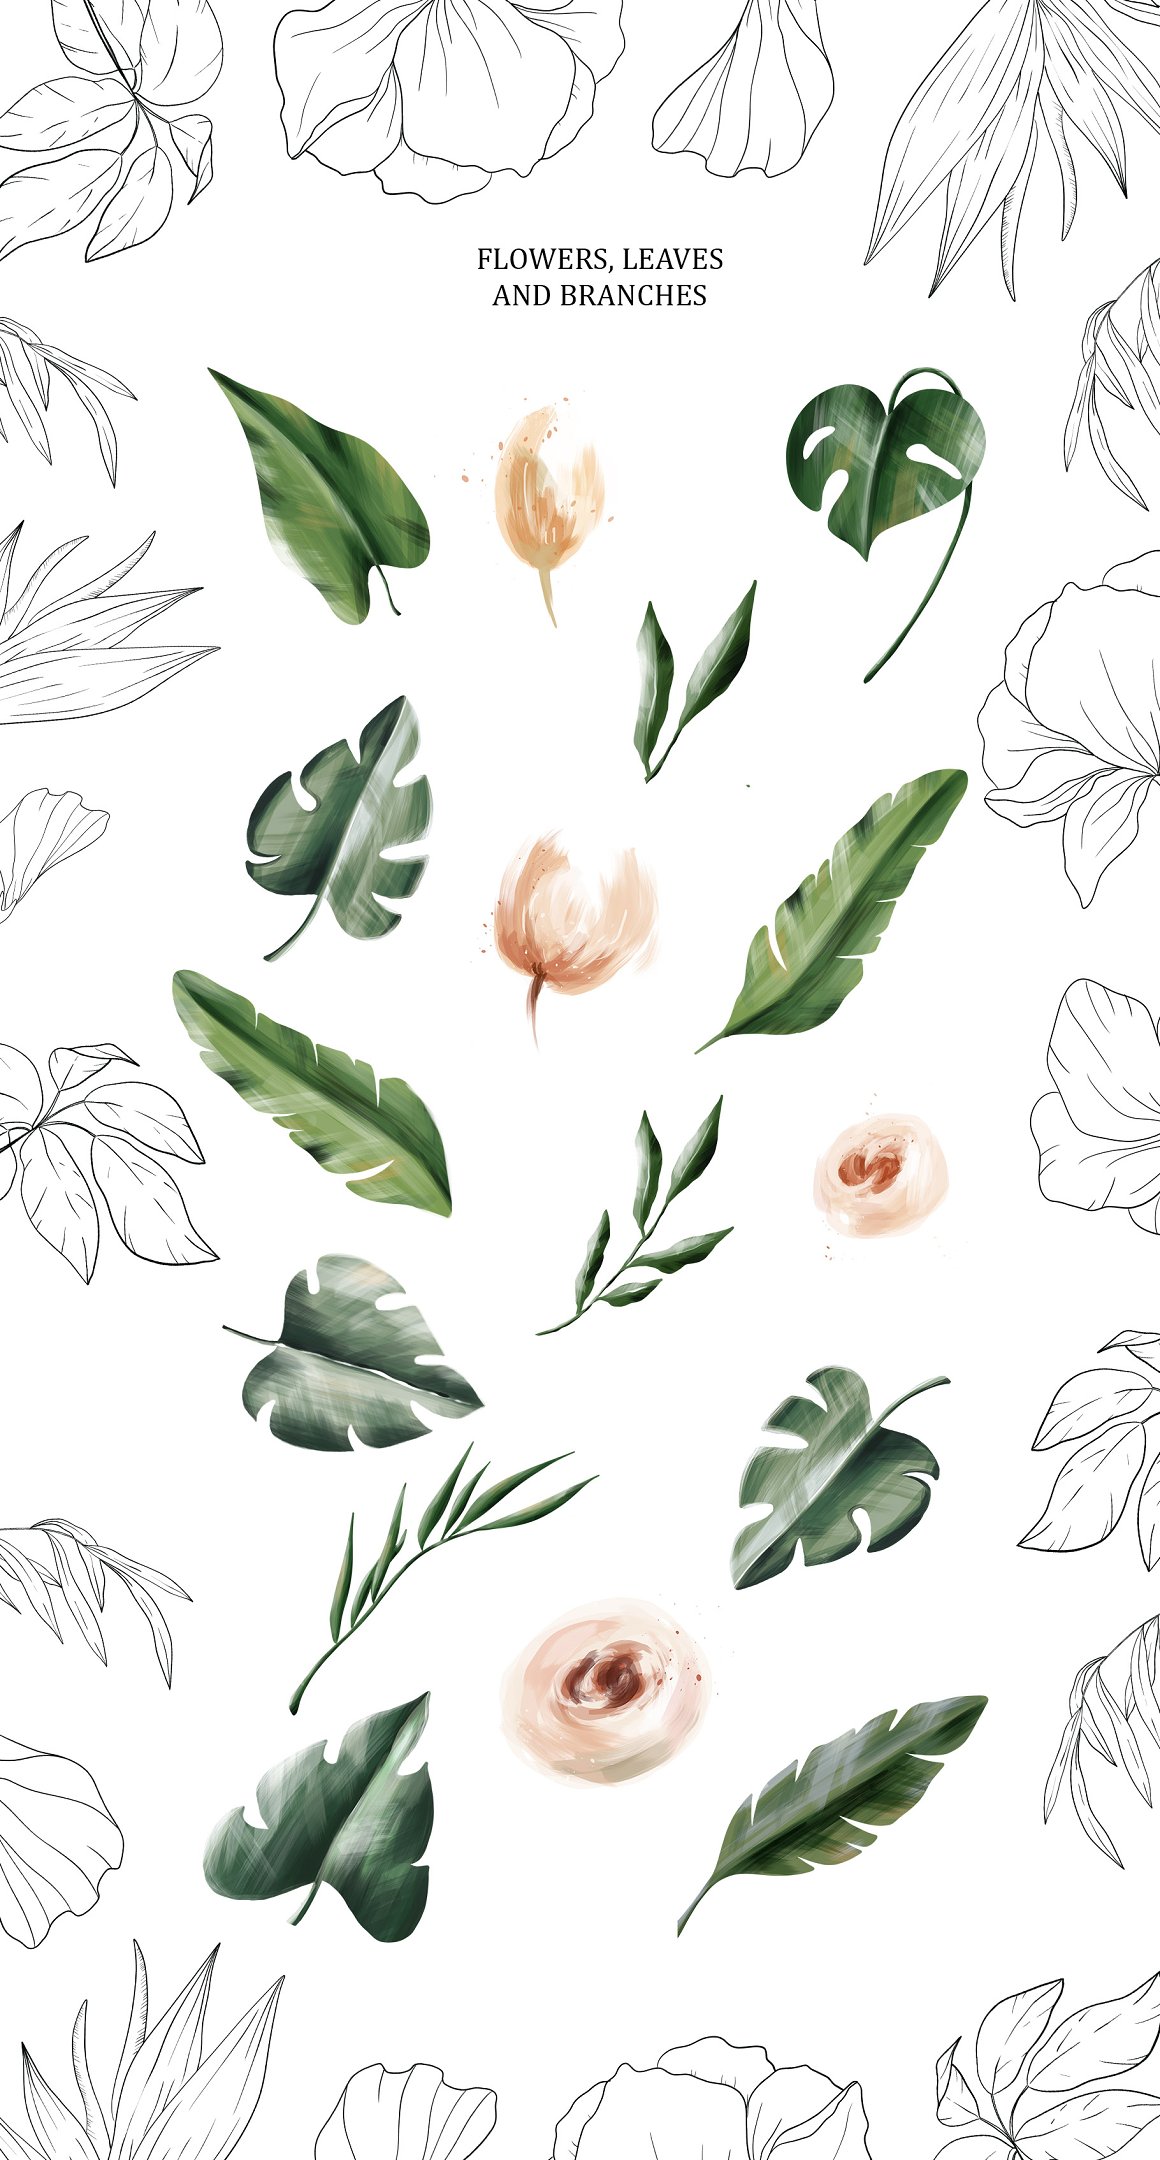 Flowers and leaves on a background.